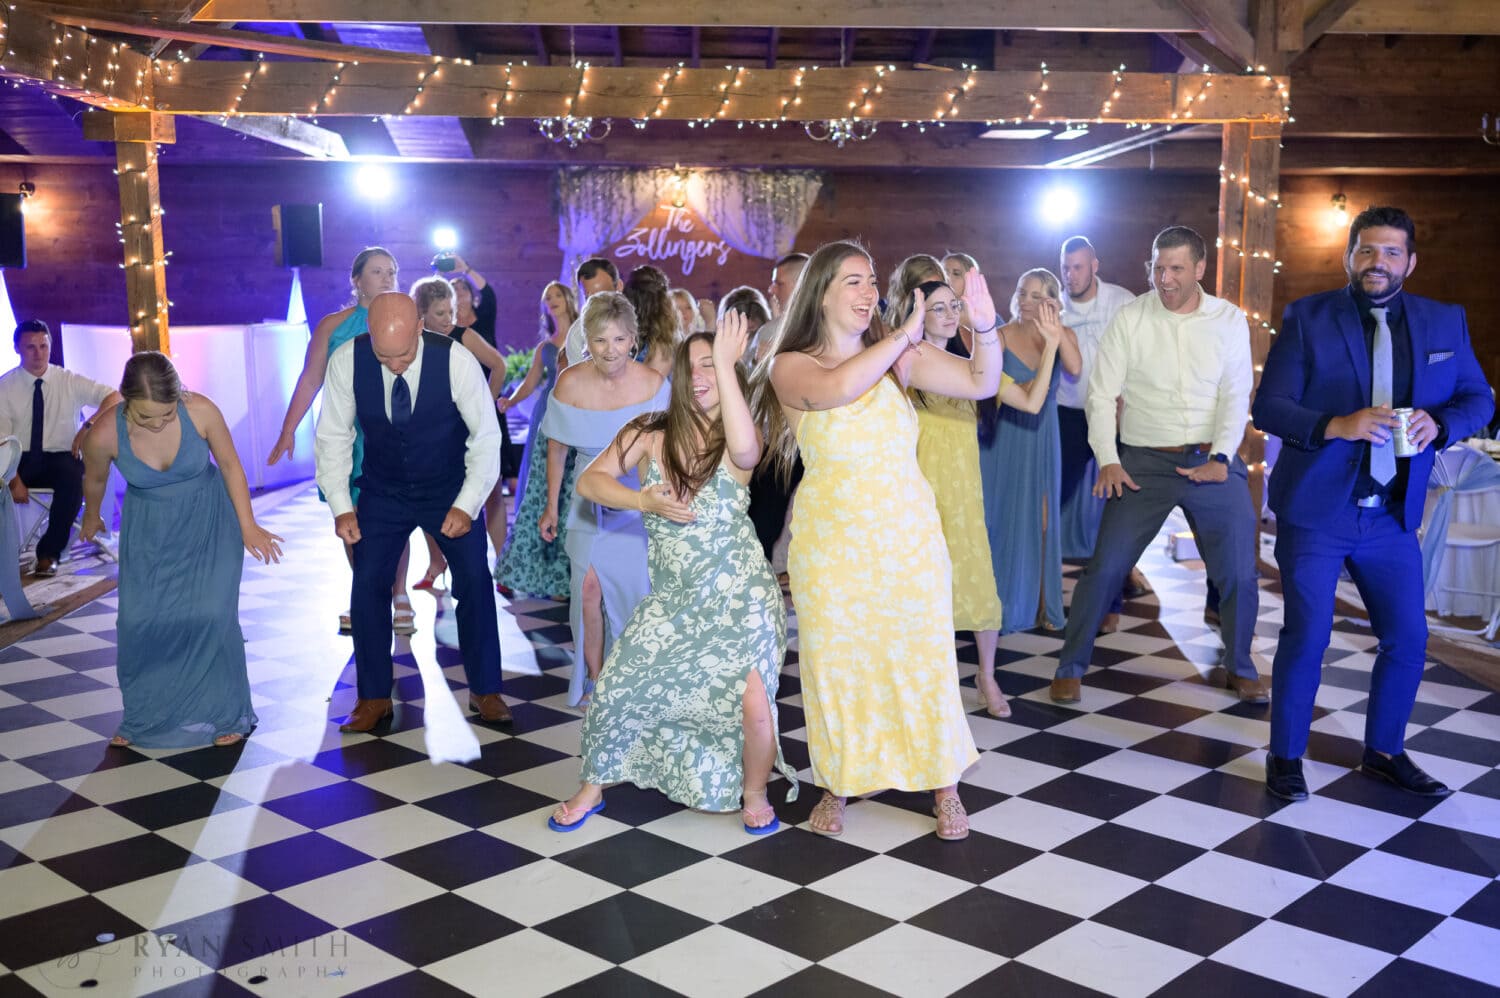 Fun dancing during the reception - The Peanut Warehouse - Conway